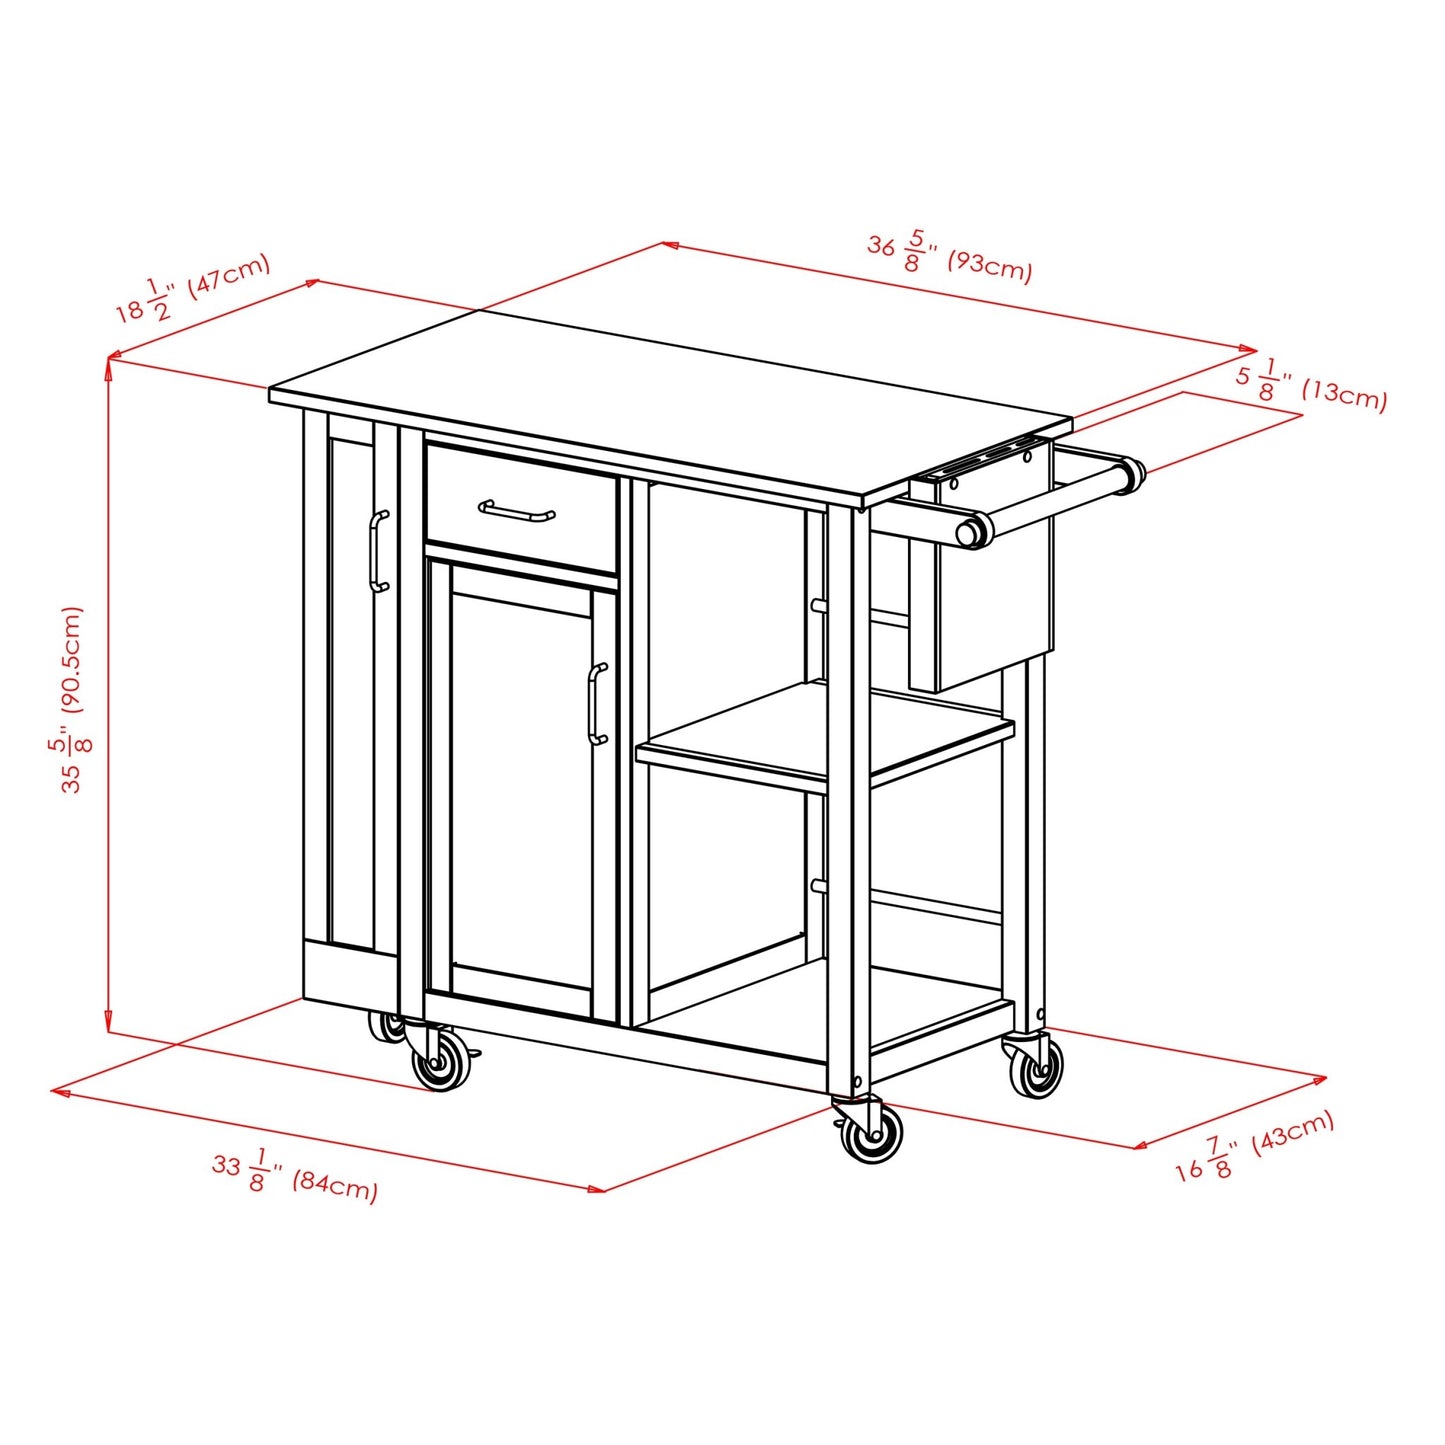 Winesome Wood Douglas Utility Kitchen Cart, Natural - The Bar Design